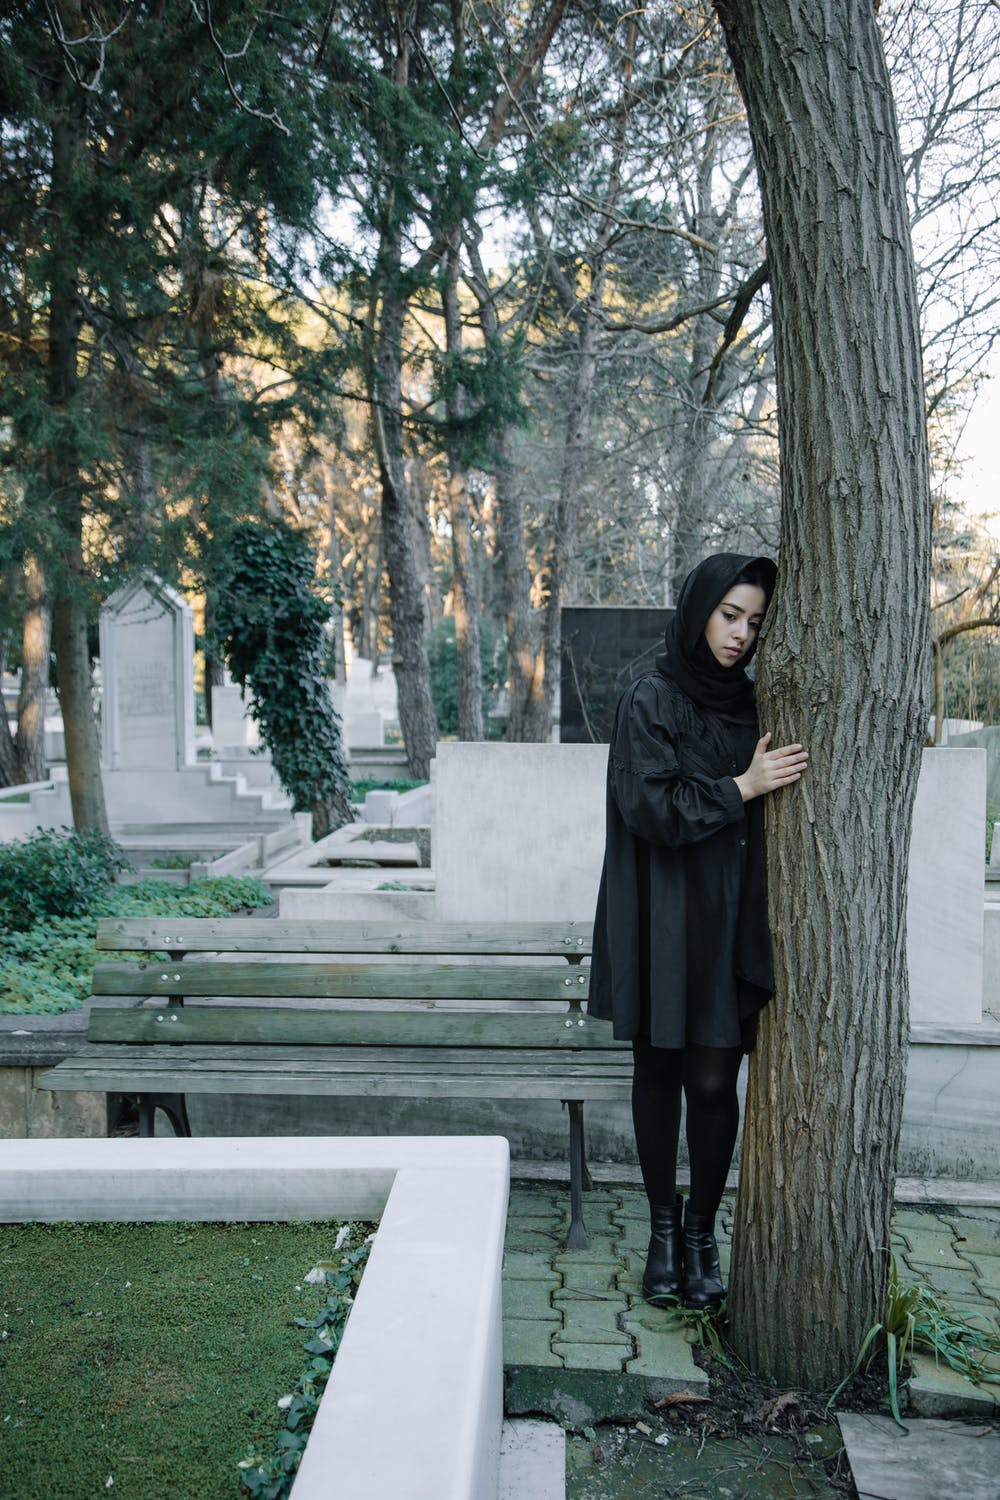 Girl in a cemetery | Source: Pexels